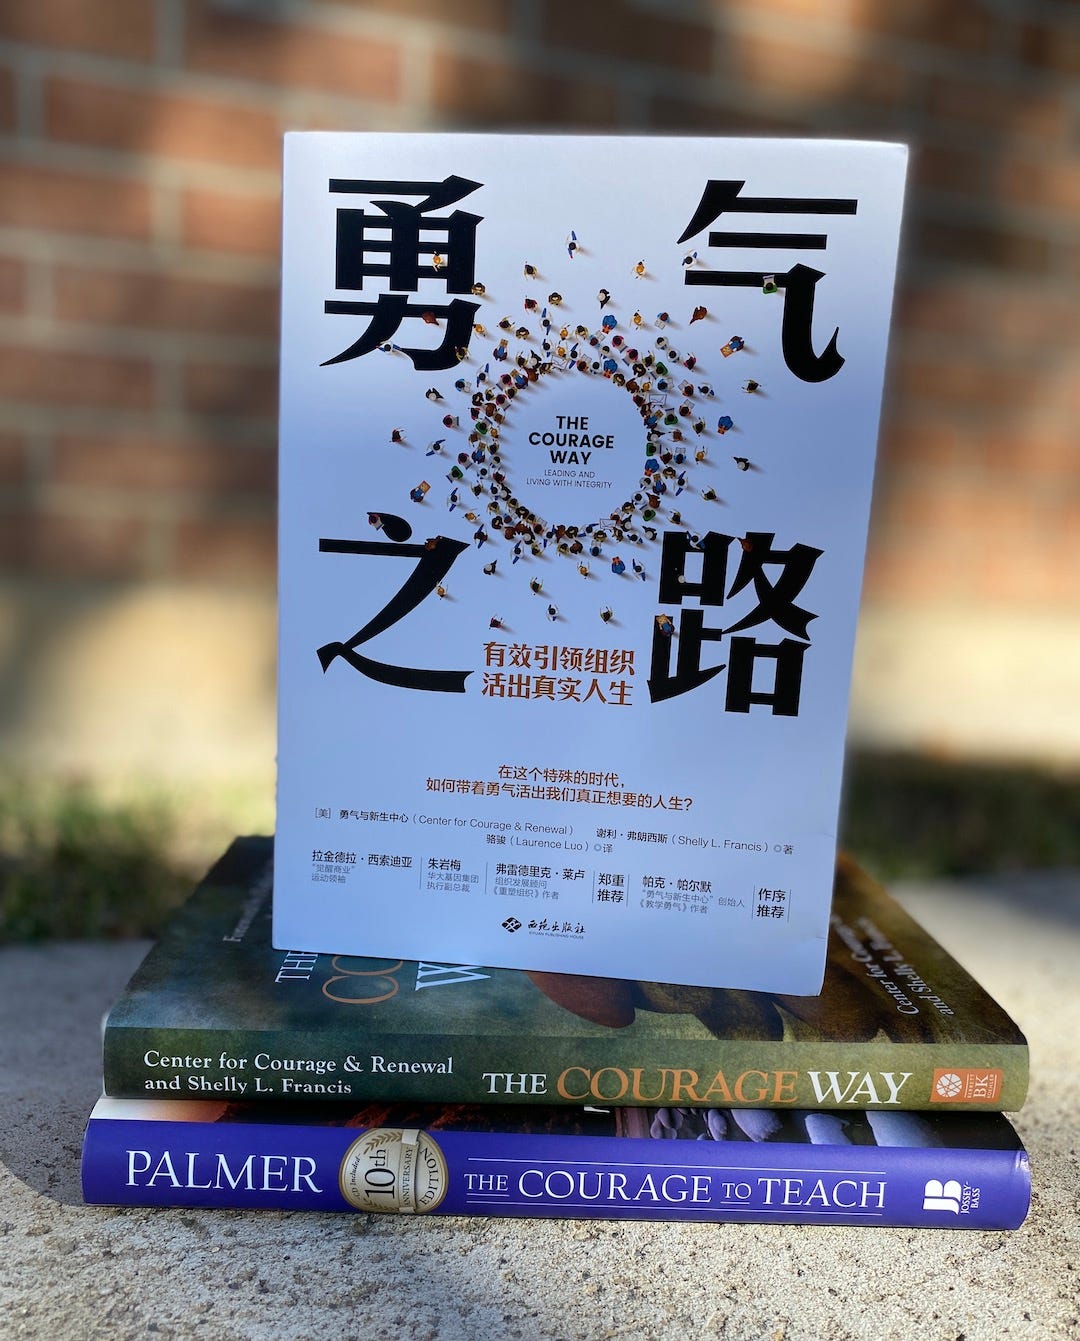 The cover of the Chinese edition of The Courage Way book sitting atop The Courage Way and The Courage to Teach books, shown spine out.